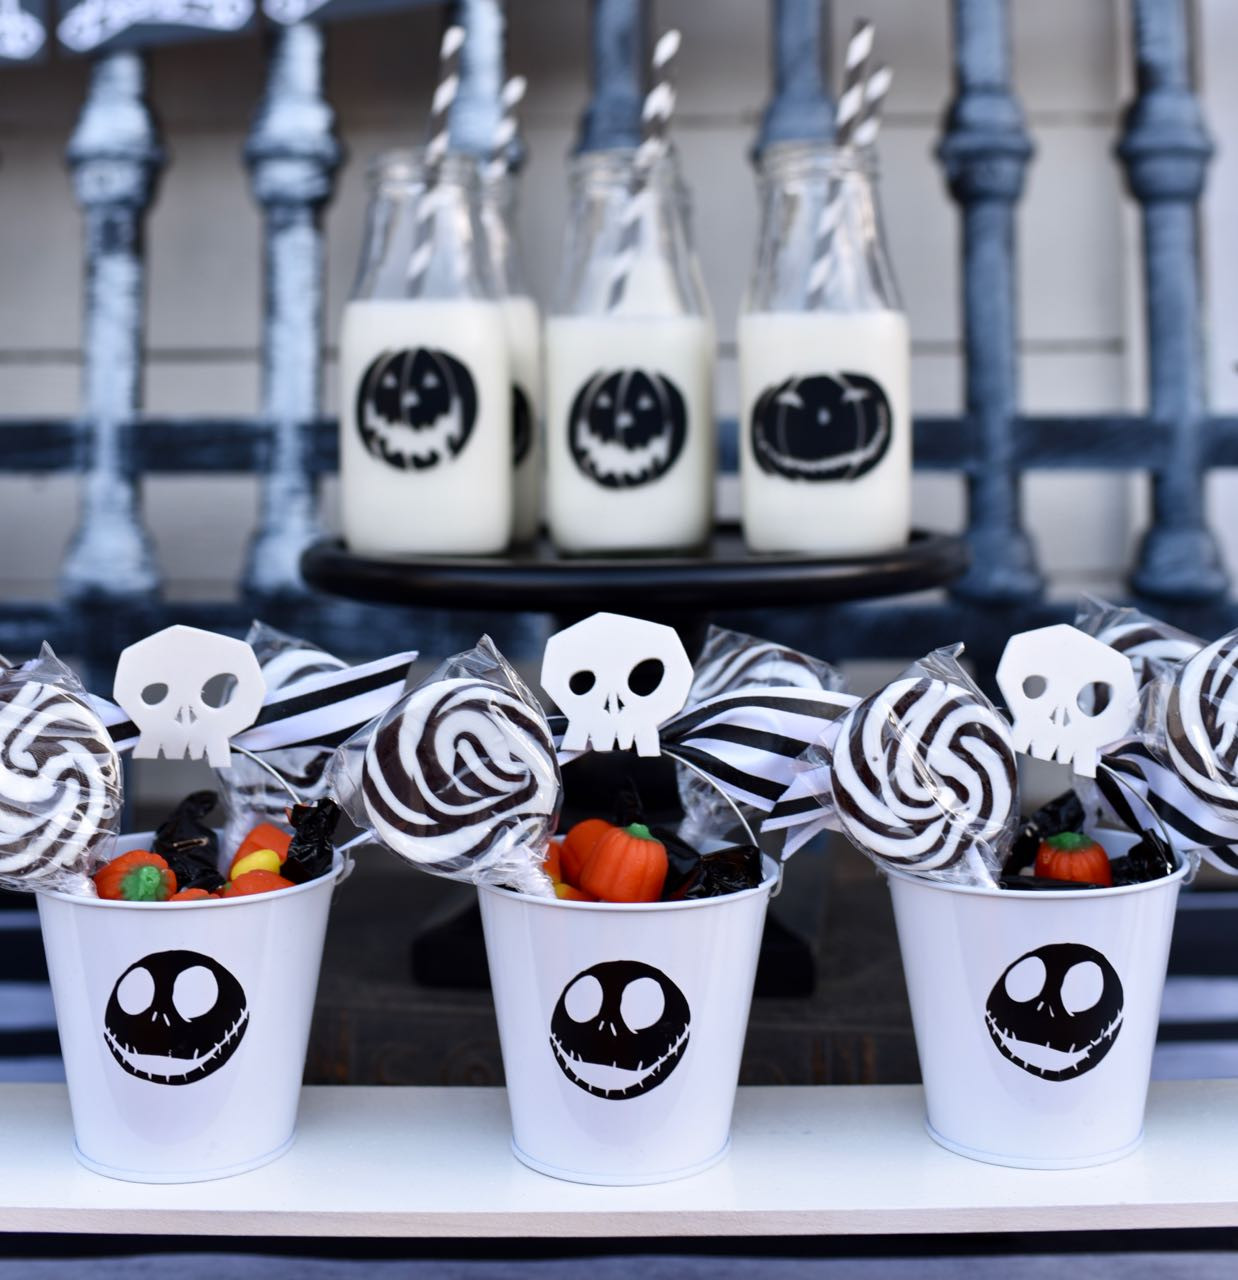 The Nightmare Before Christmas Birthday Party Ideas
 Nightmare Before Christmas Party Favors Make Life Lovely